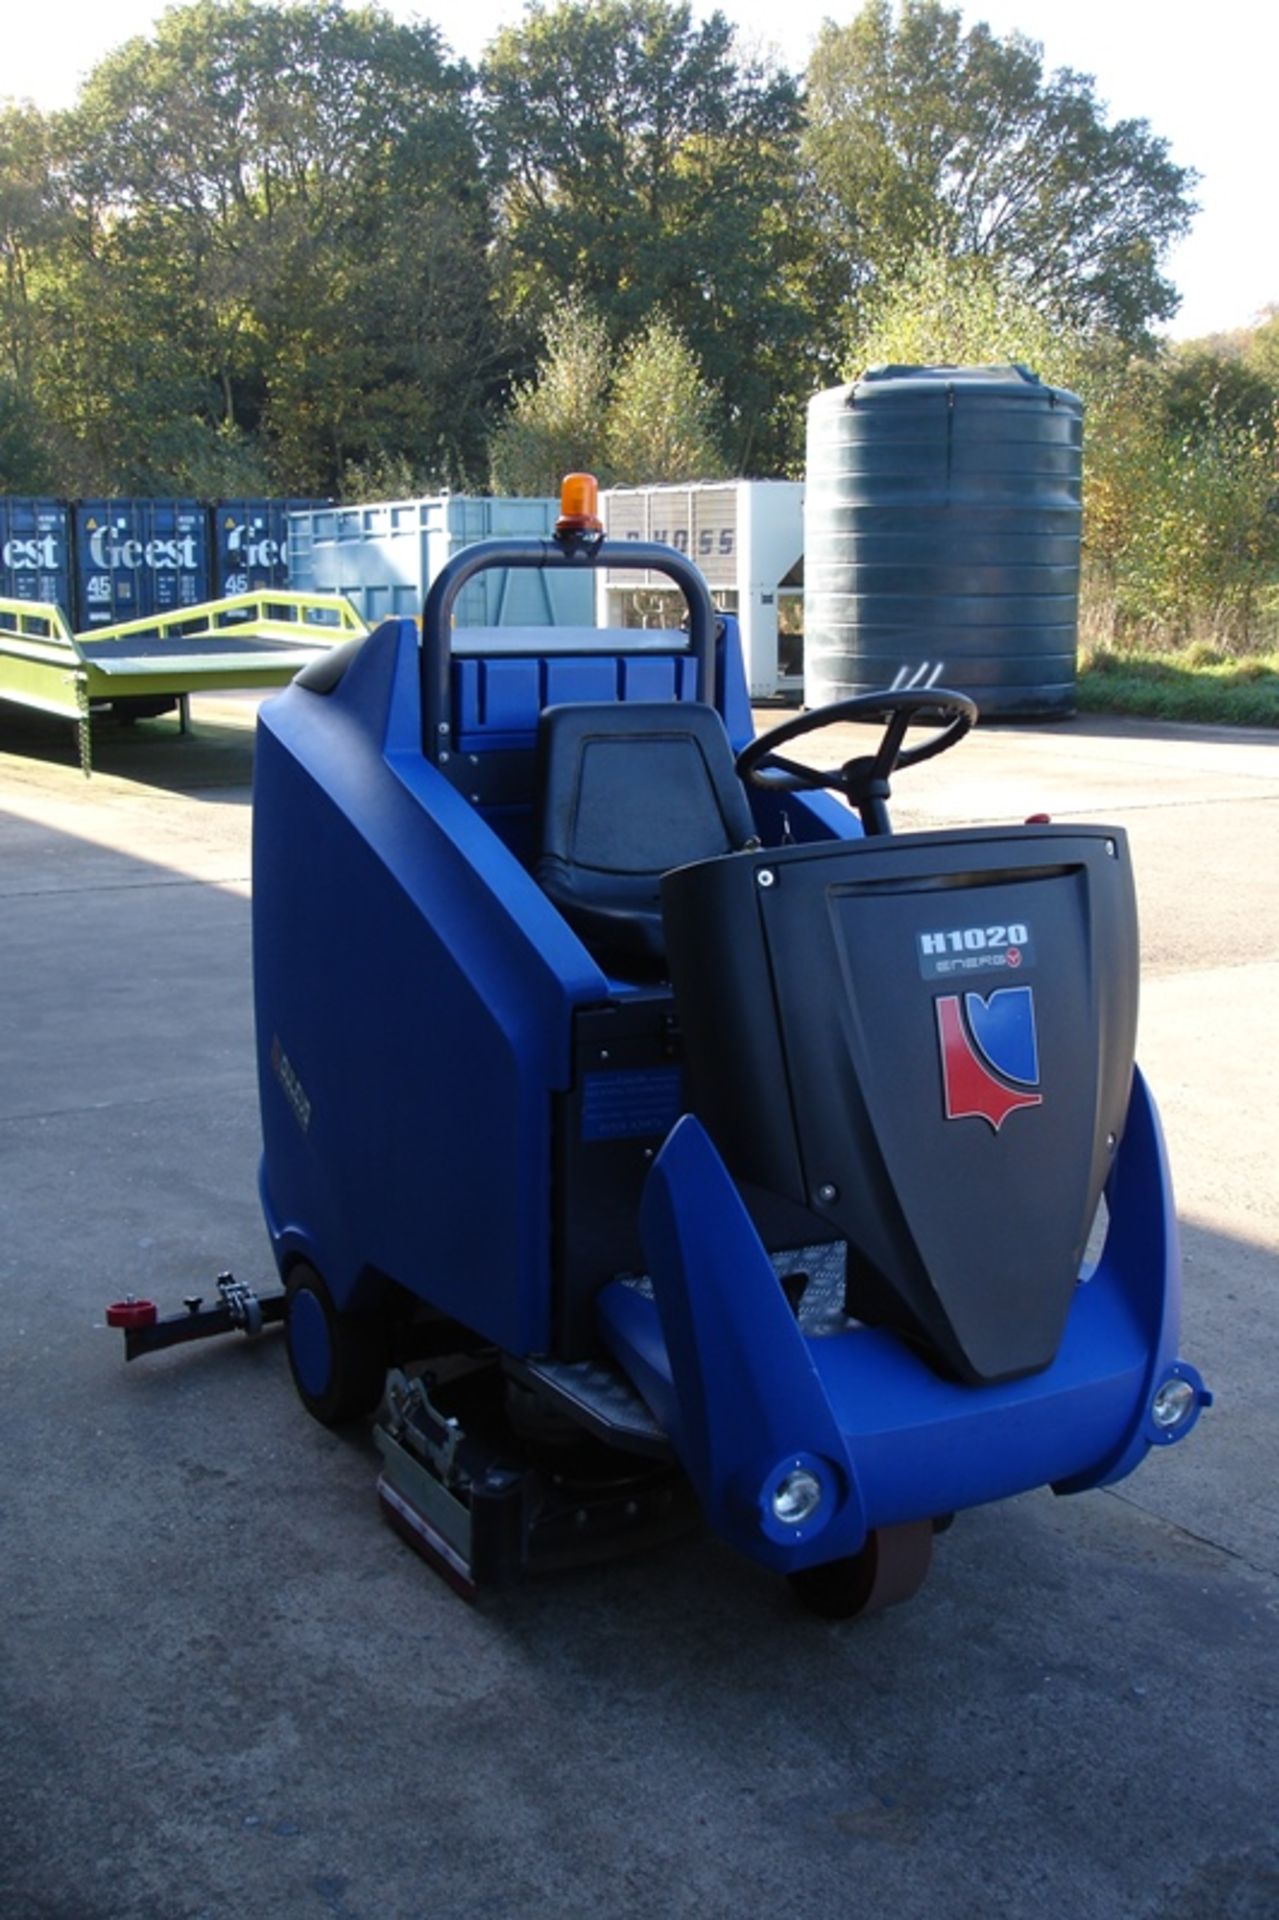 Dulevo Electric Ride On Scrubber/Sweeper - Image 4 of 10